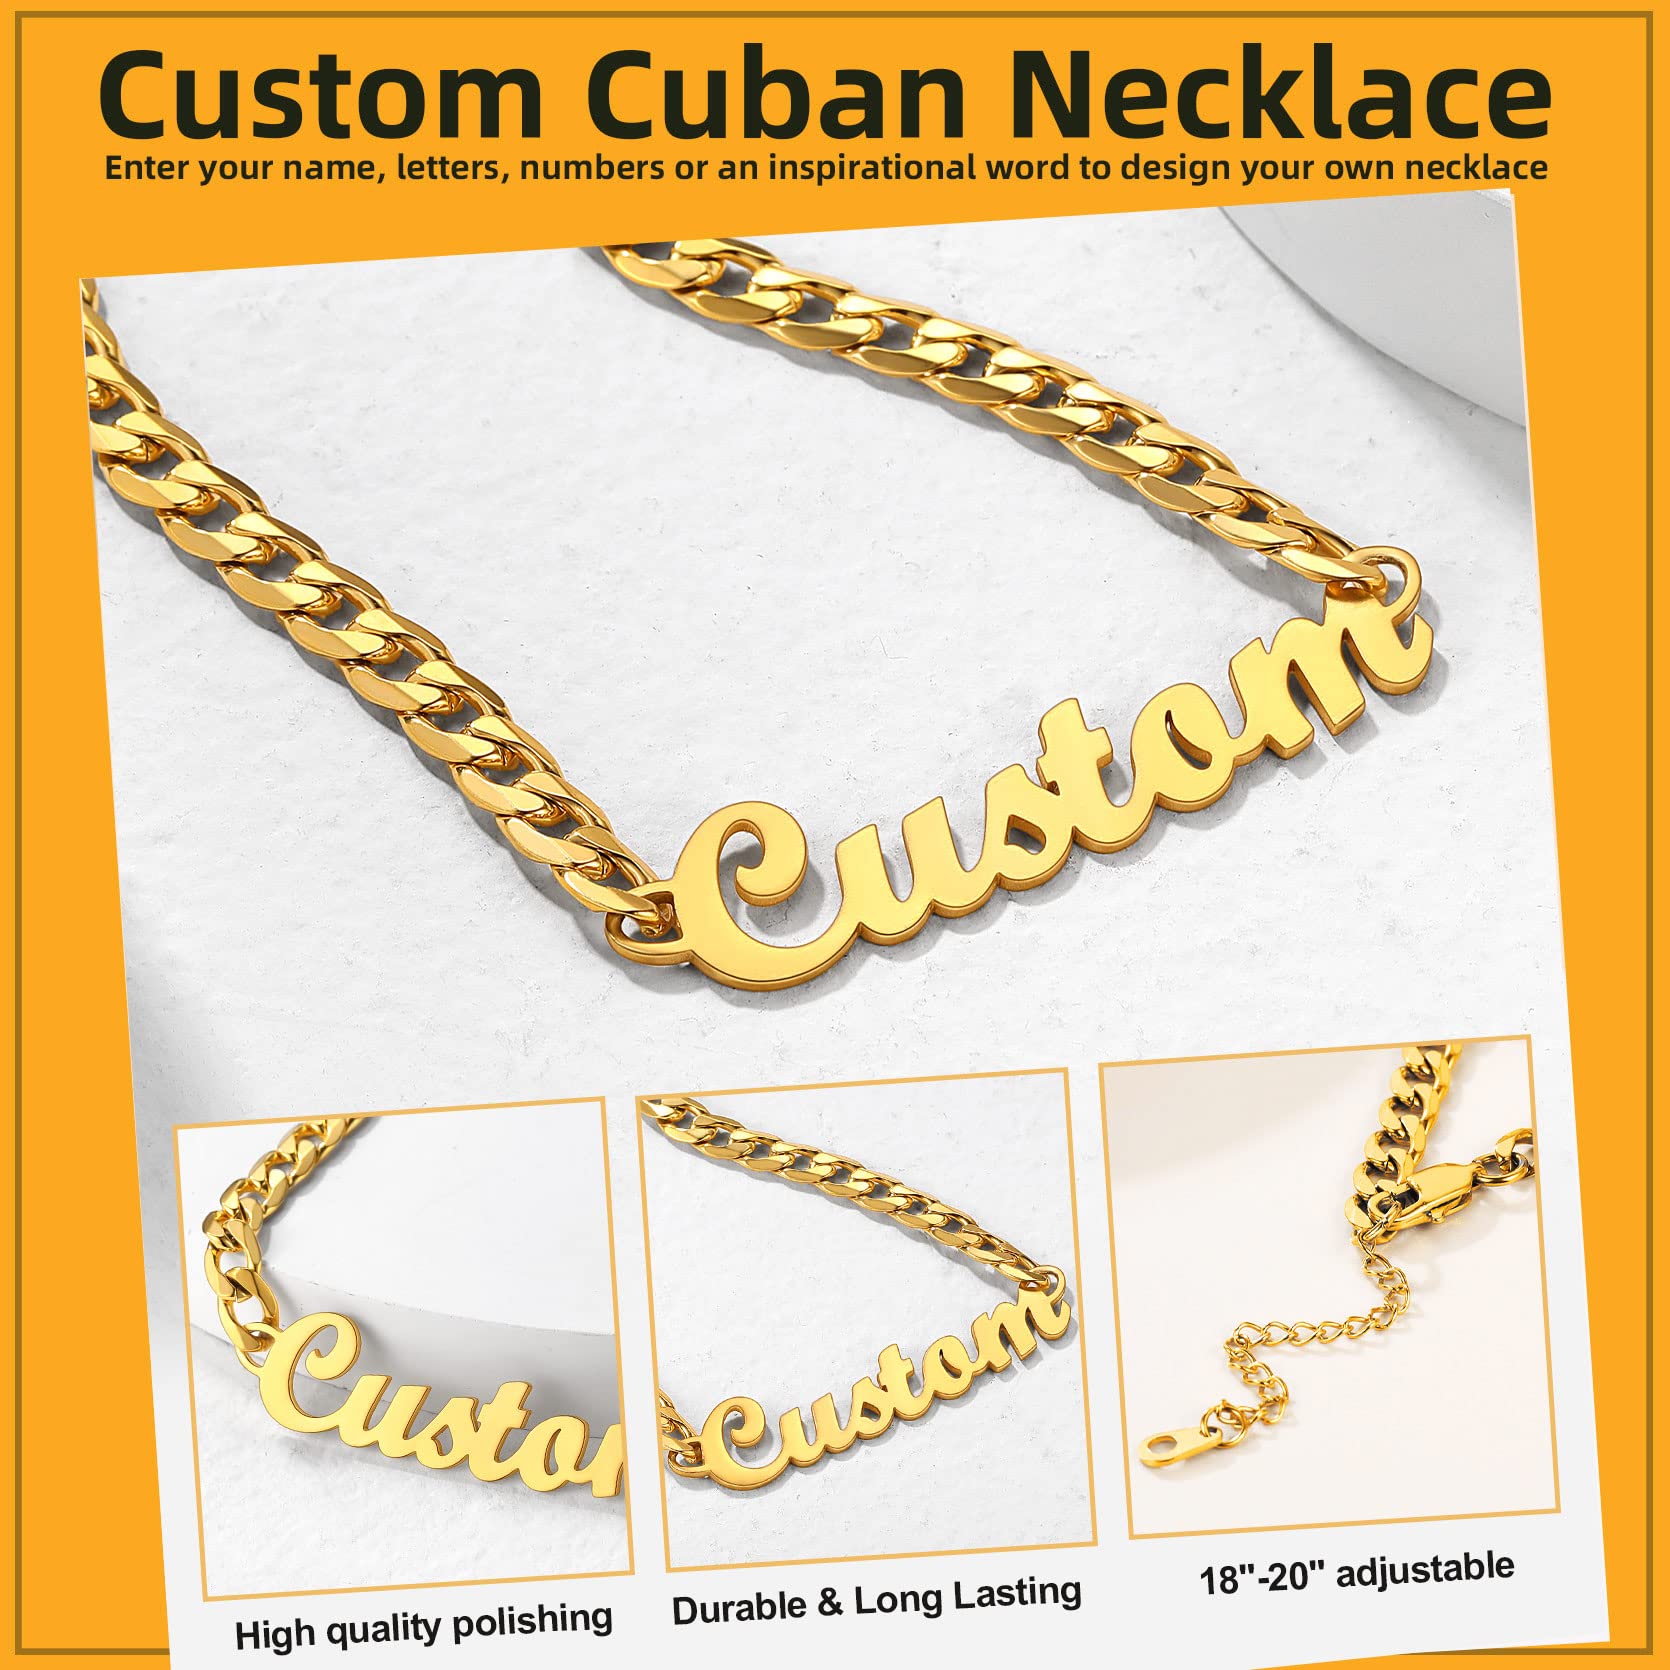 GOLDCHIC JEWELRY Name Plated Necklace Personalized for Men Women, Stainless Steel Customized Old English Nameplate Choker with Curb Chain Custom Jewelry, 16 inches to 30 inches